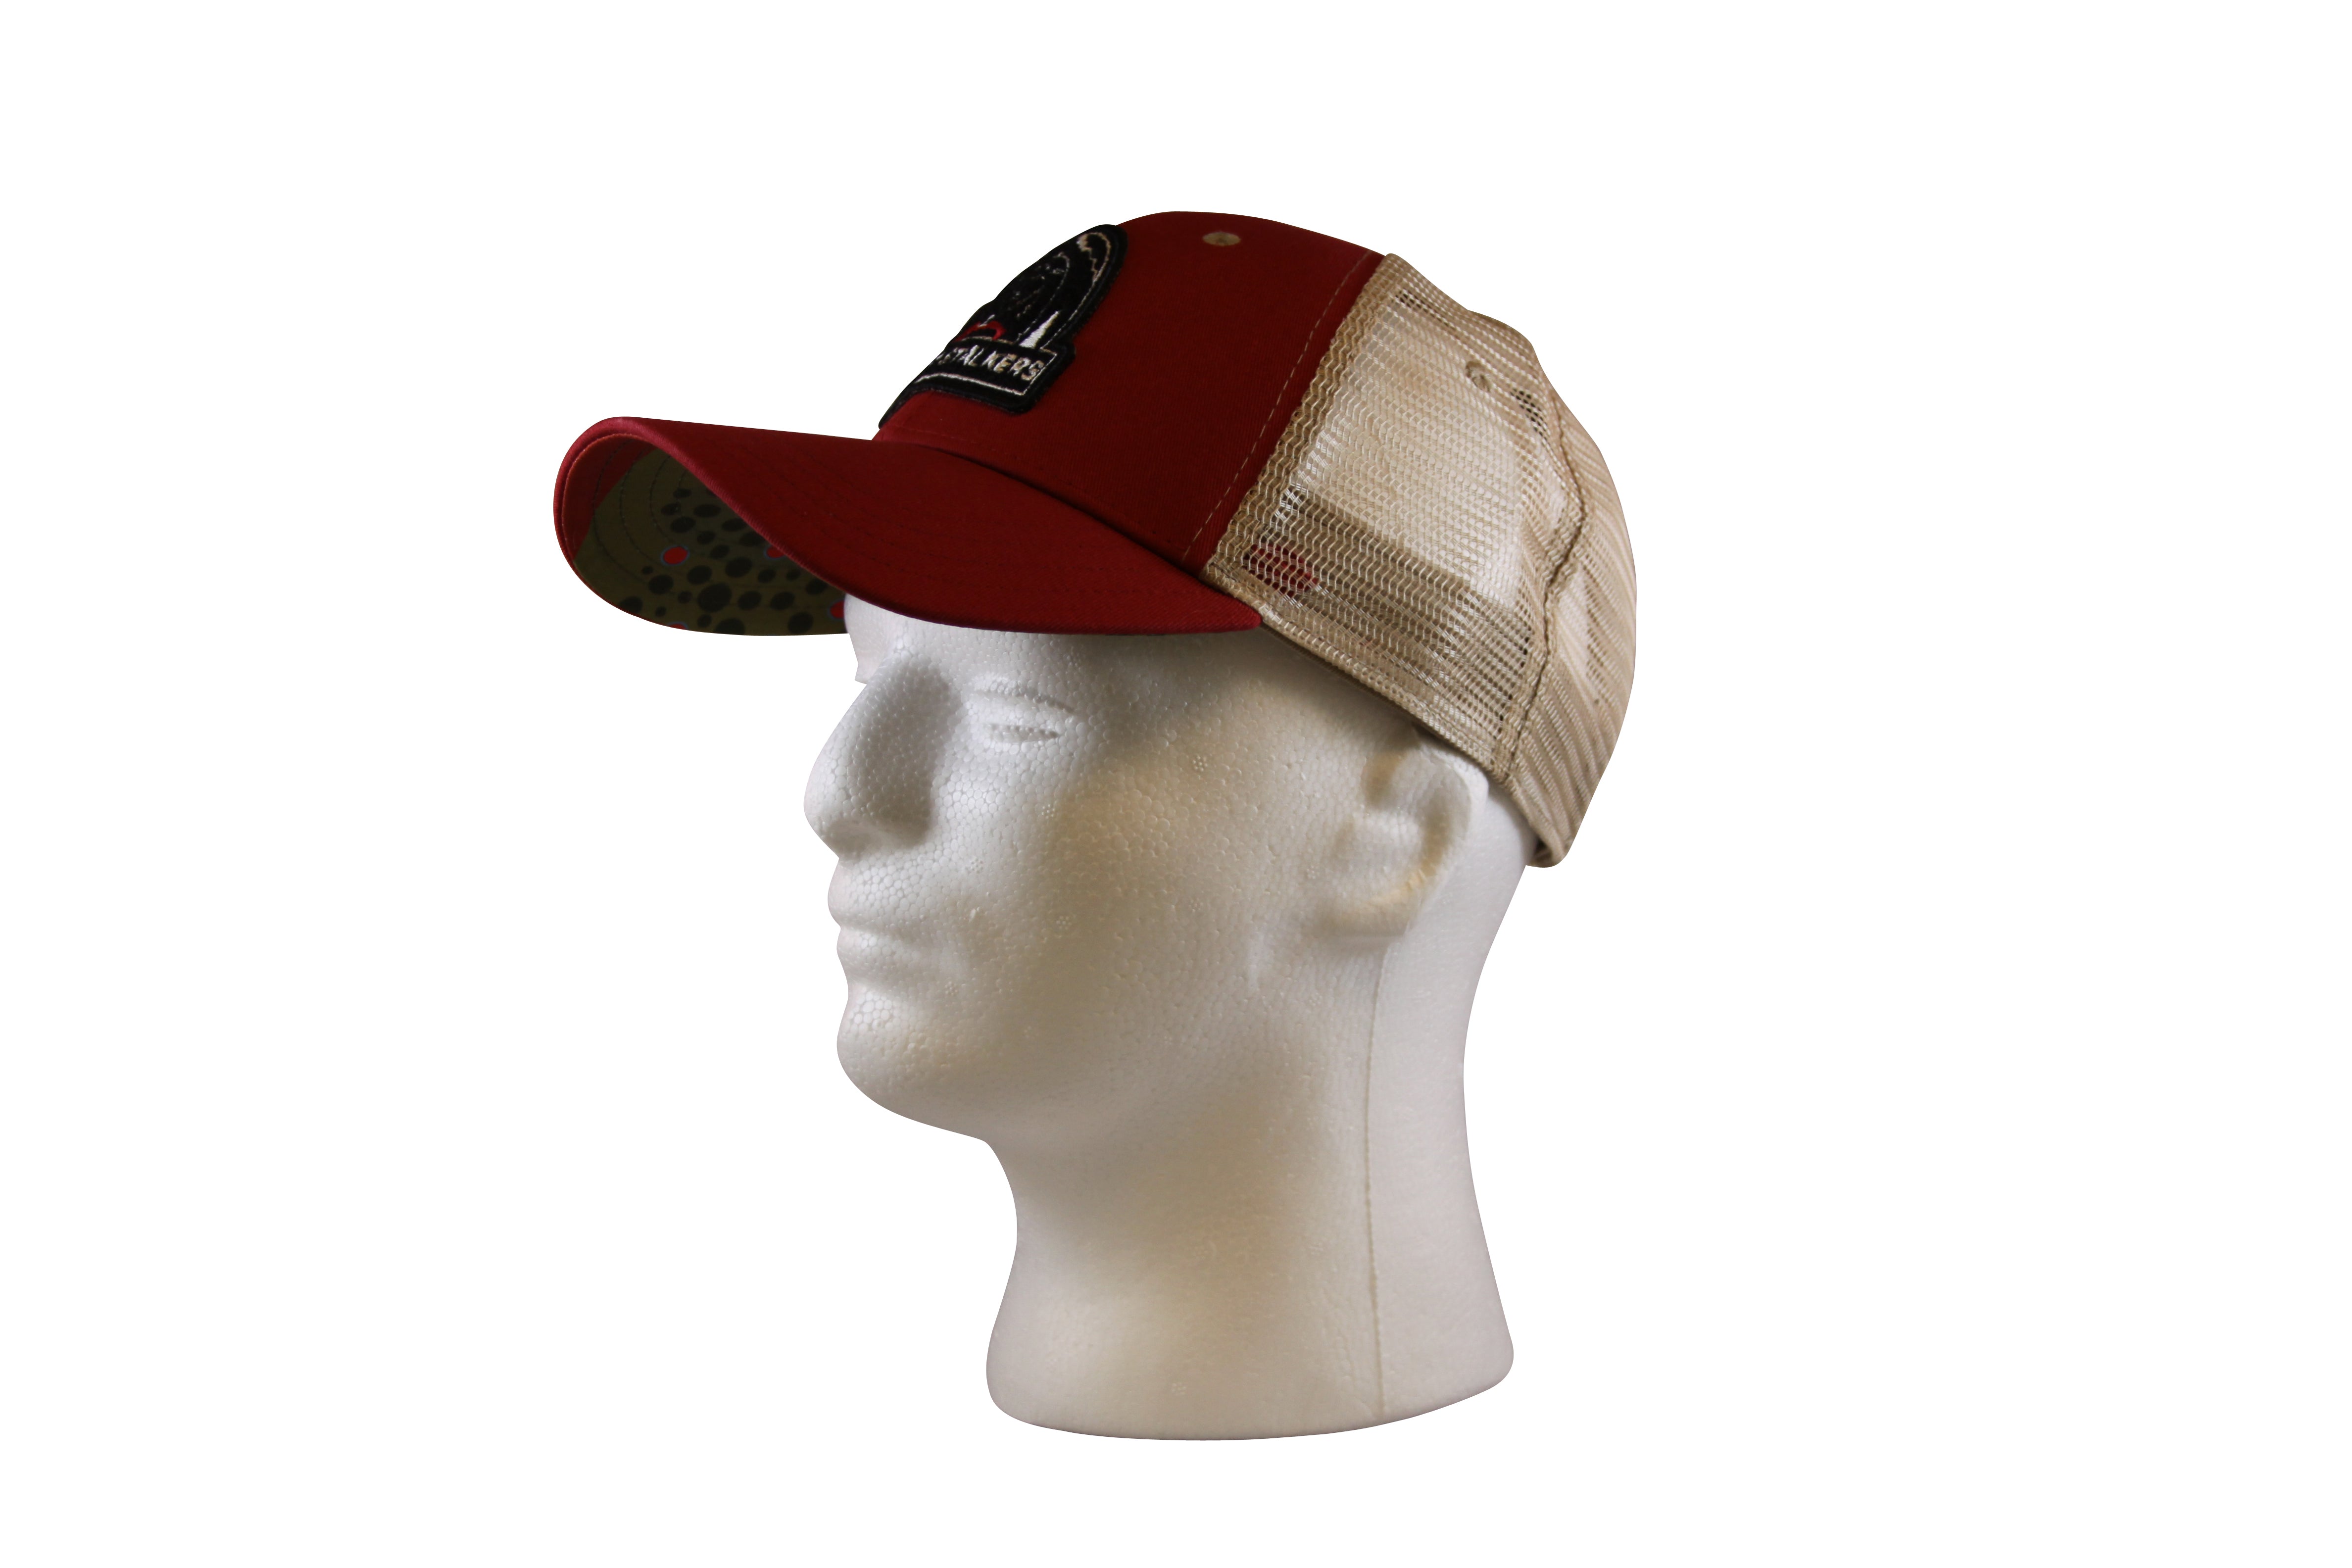 Brook Trout Hat - Red